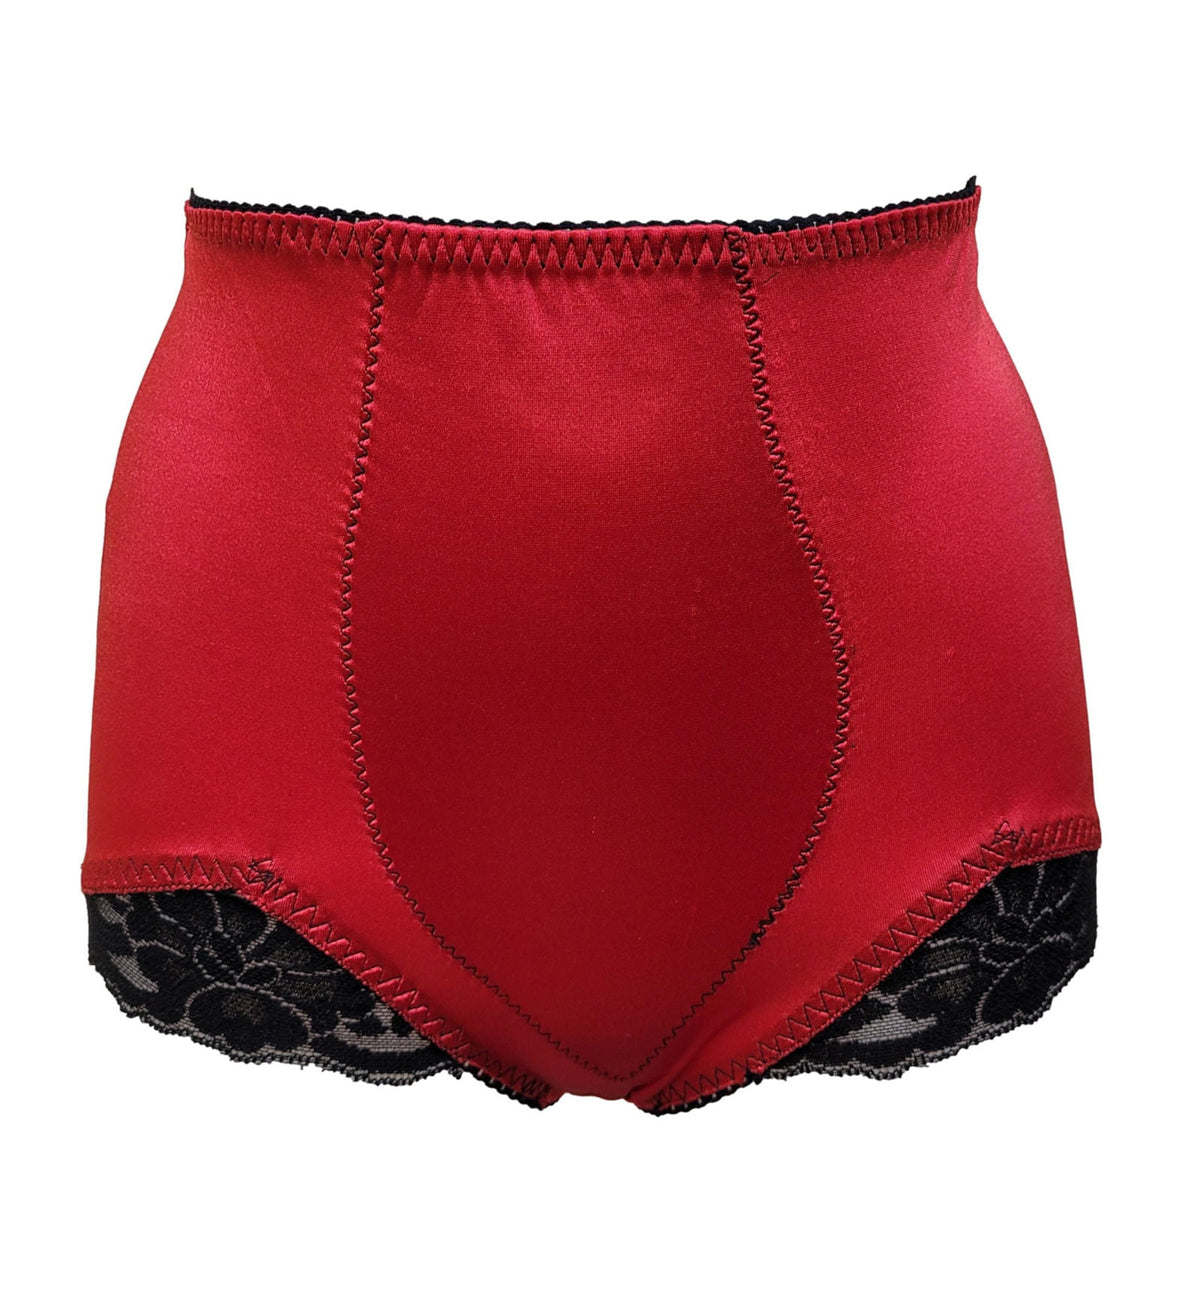 Rago Light Control V-Leg Panty Brief (919),Small,Red - Red,Small